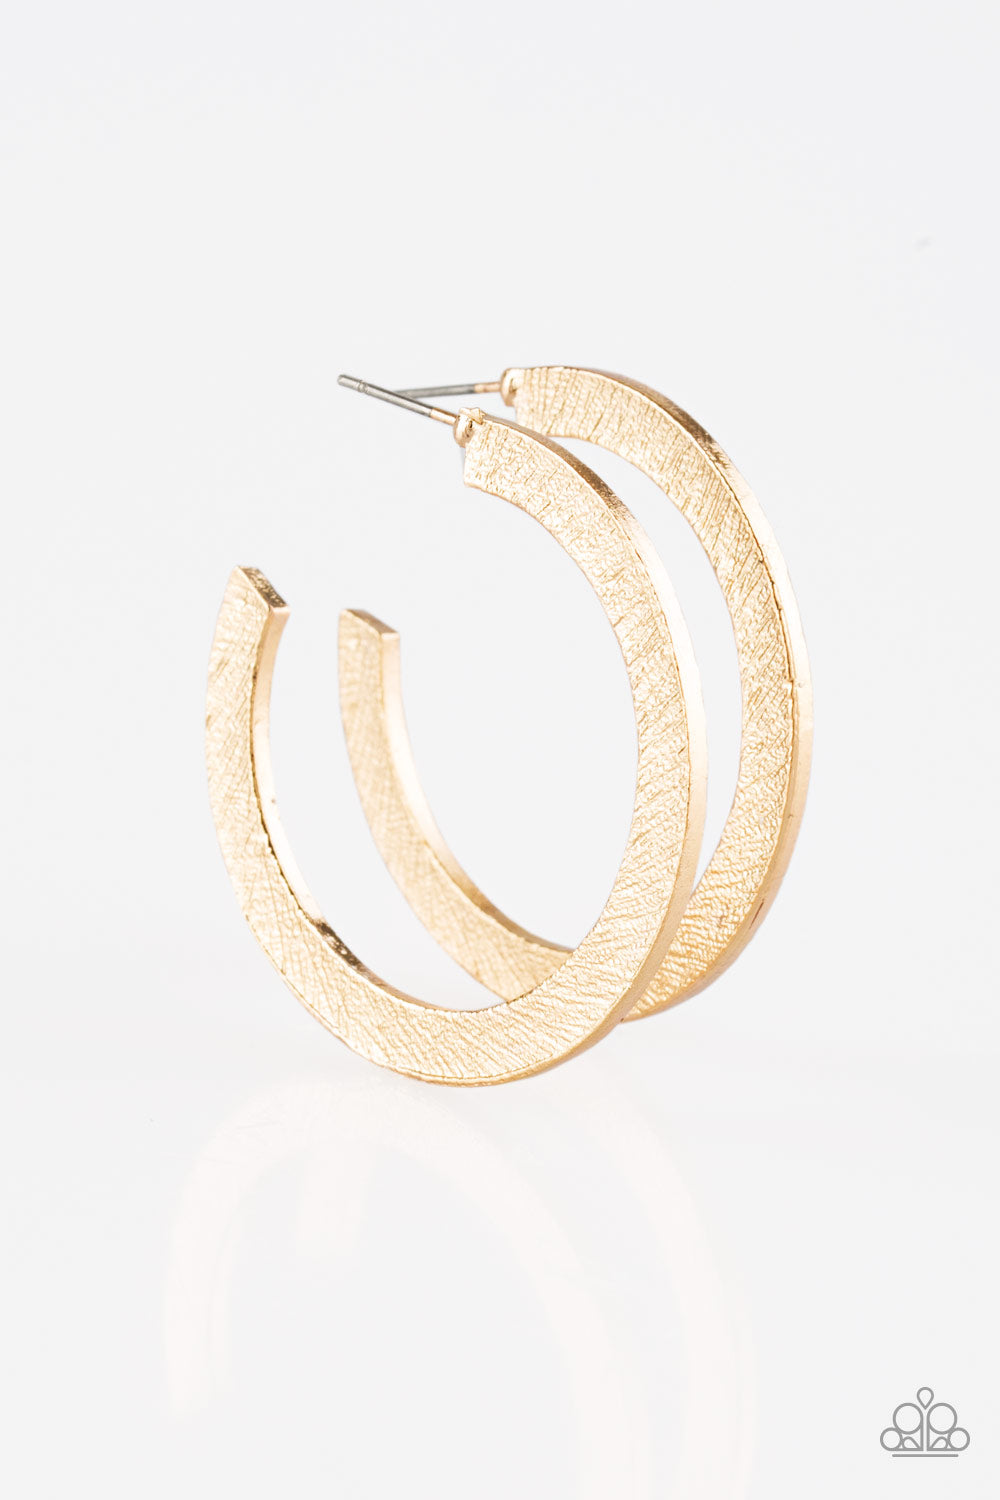 Paparazzi Accessories HAUTE Glam - Gold Earrings